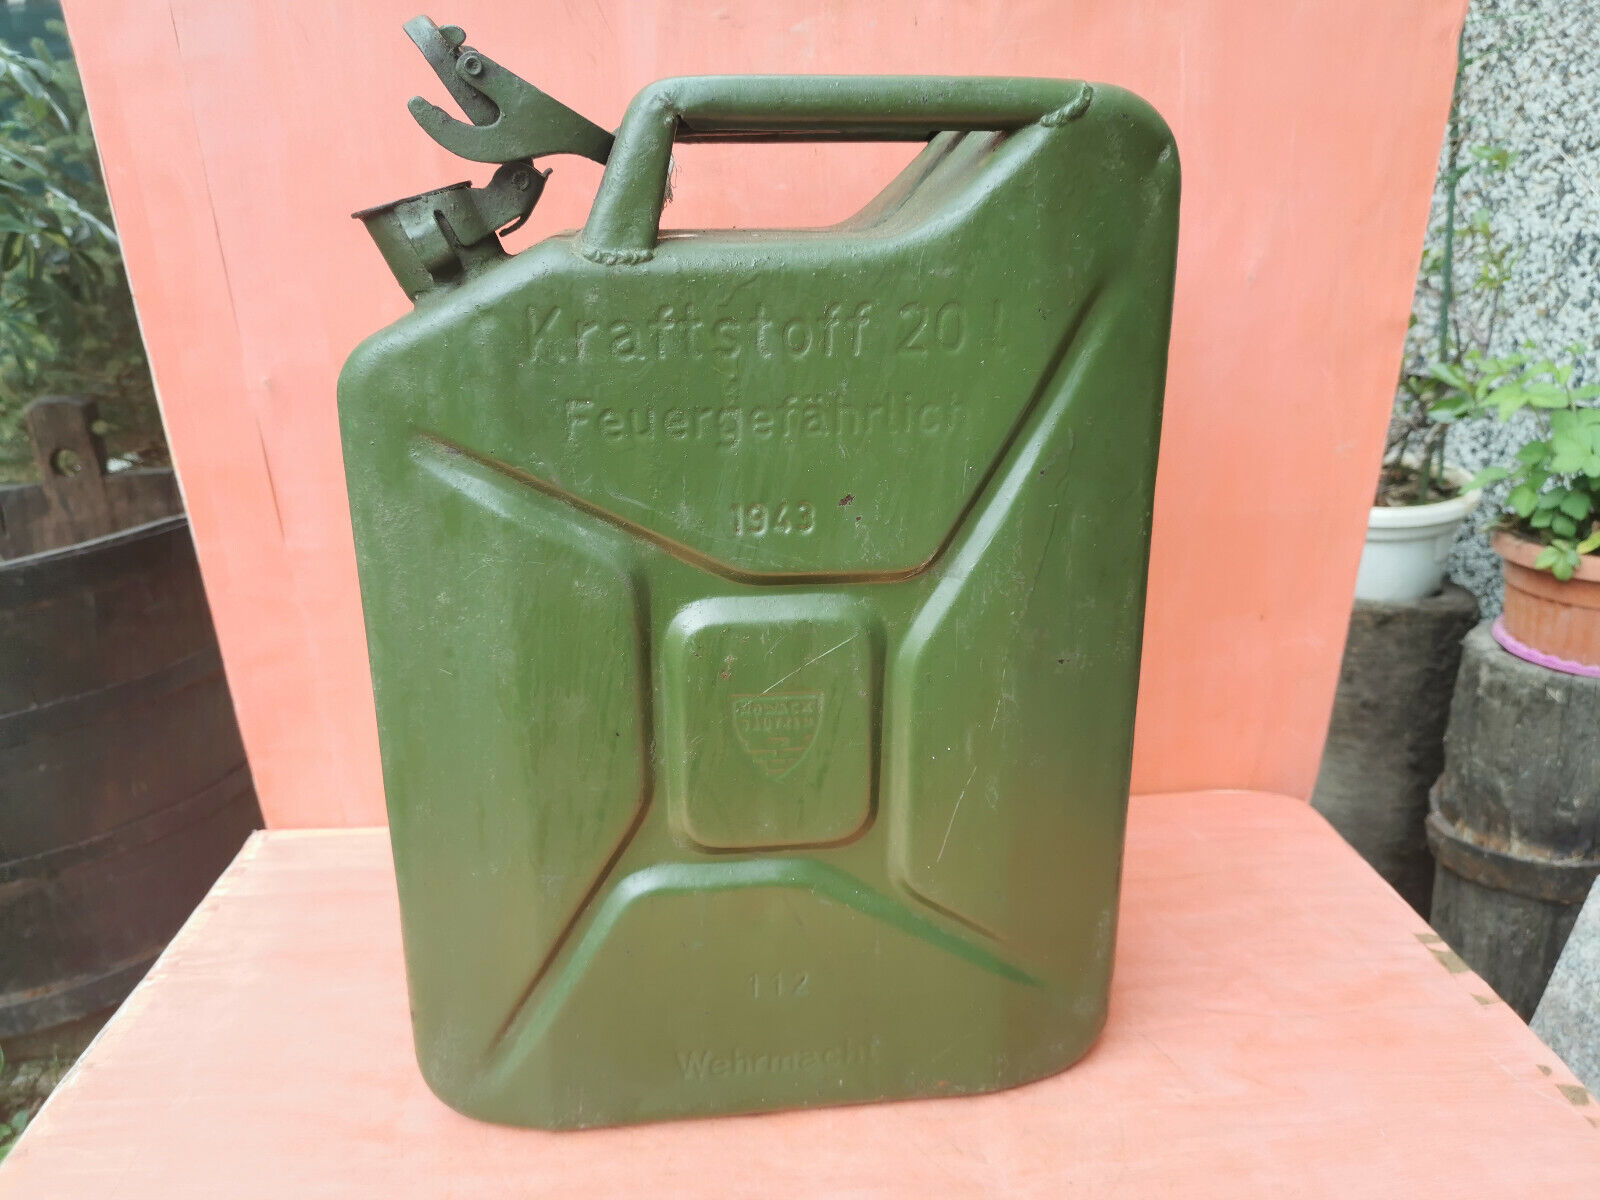 OLD VINTAGE GDR WEHRMACHT MILITARY JERRY CAN GAS FUEL CONTEINER WWII WW2 1943s